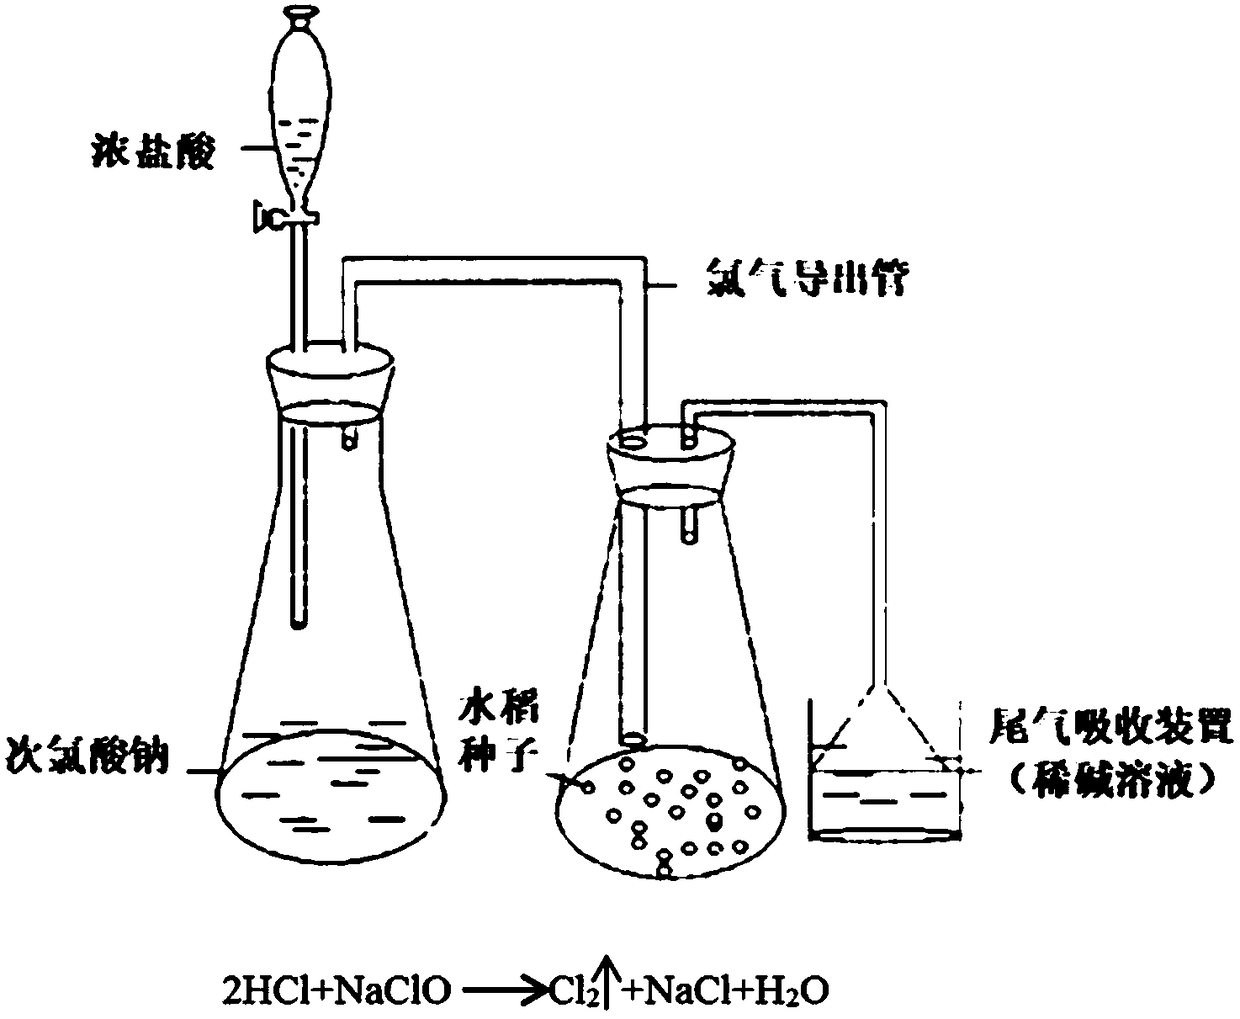 Method for disinfecting rice seeds